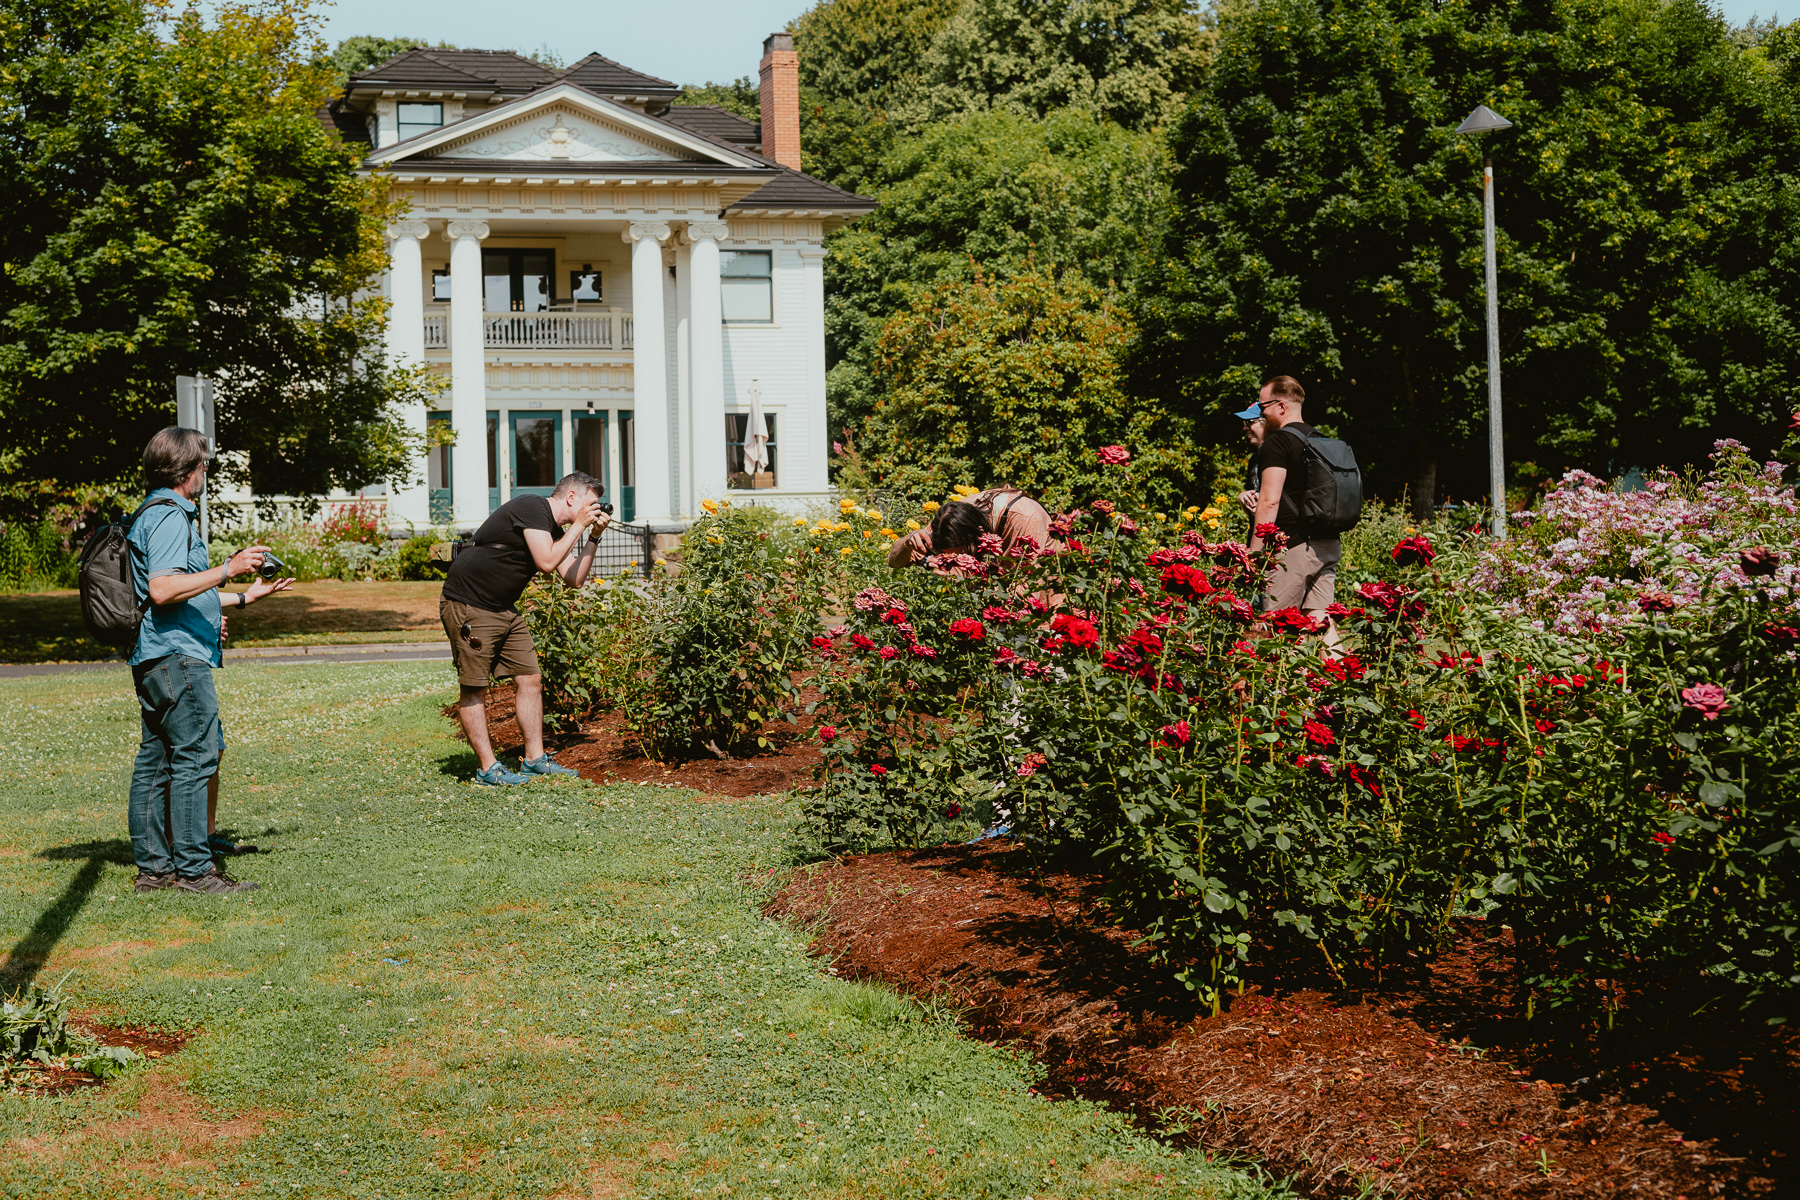 People with cameras are scattered about taking photos in a field with green grass and rose beds. In the background is a house with trees on both sides, and a bit of blue sky above.